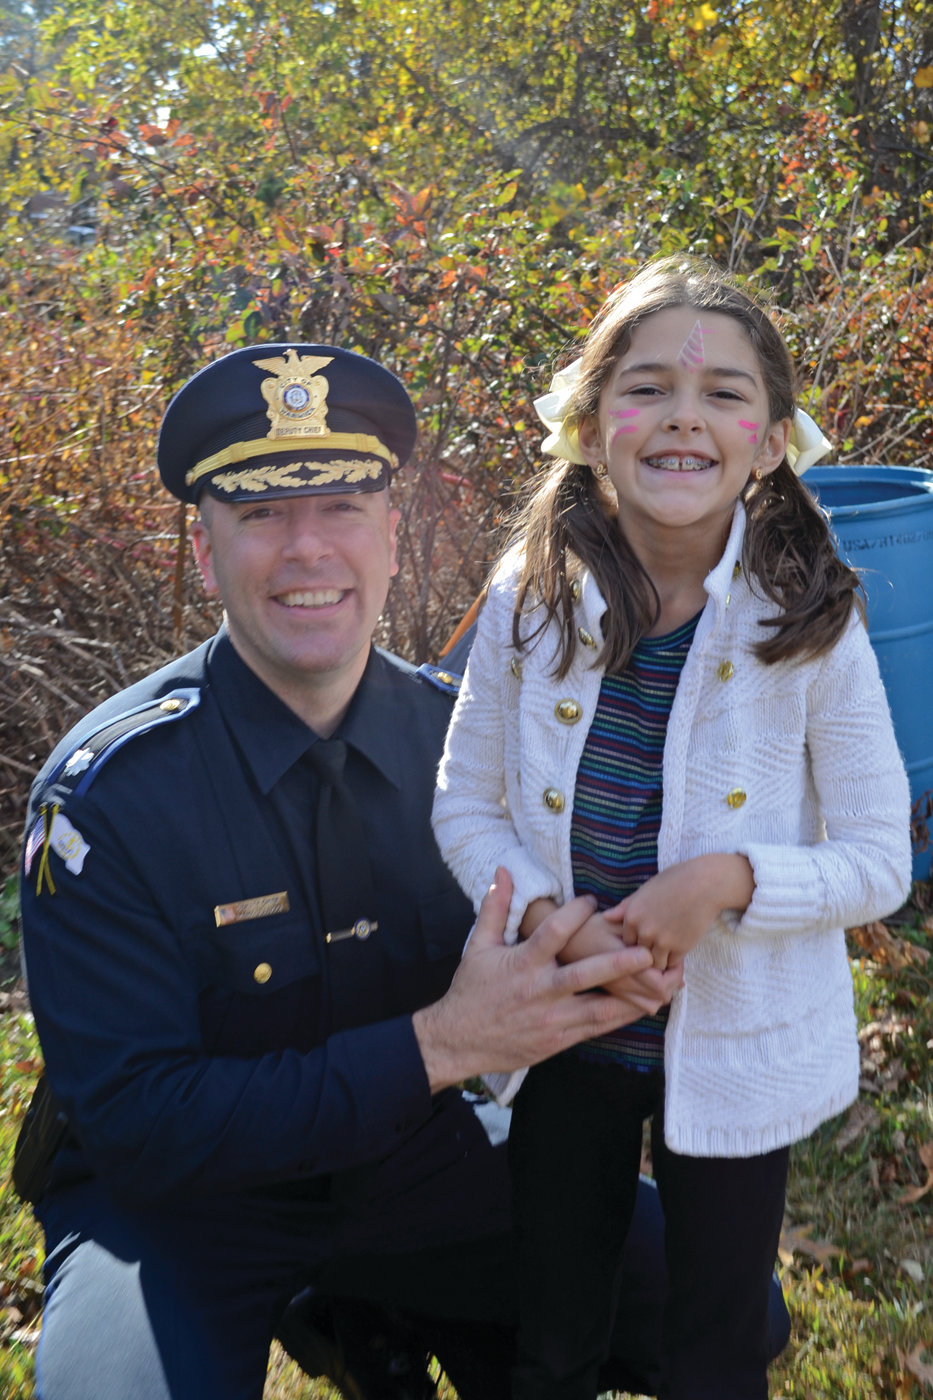 BRING YOUR DAUGHTER TO WORK DAY: Warwick Deputy Police Chief Mark Ulucci with his daughter, Sabrina, who enjoyed a free face painting on Saturday at the park celebration.